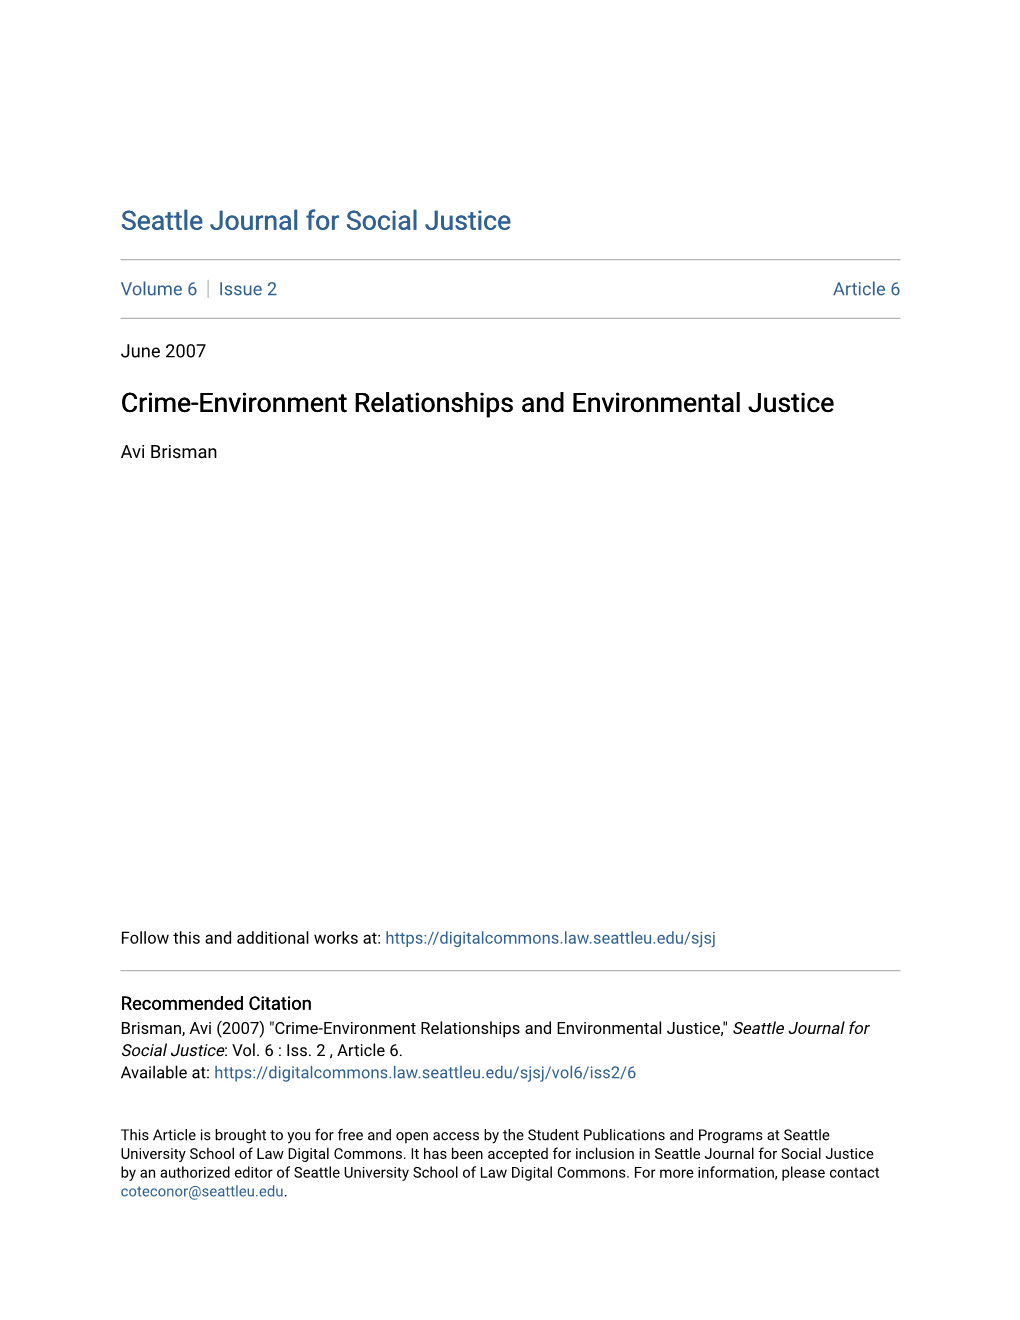 Crime-Environment Relationships and Environmental Justice